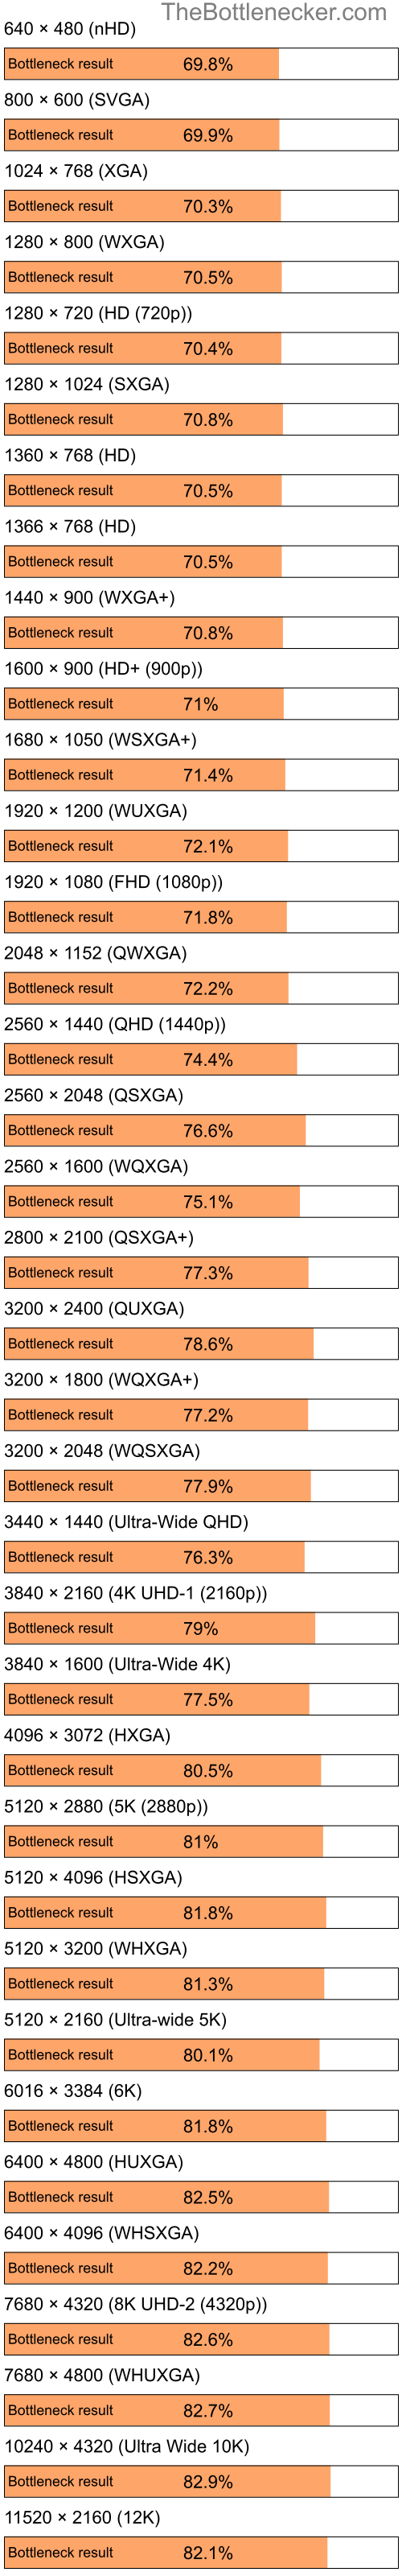 Bottleneck results by resolution for Intel Celeron M 410 and AMD Mobility Radeon HD 4250 in Graphic Card Intense Tasks